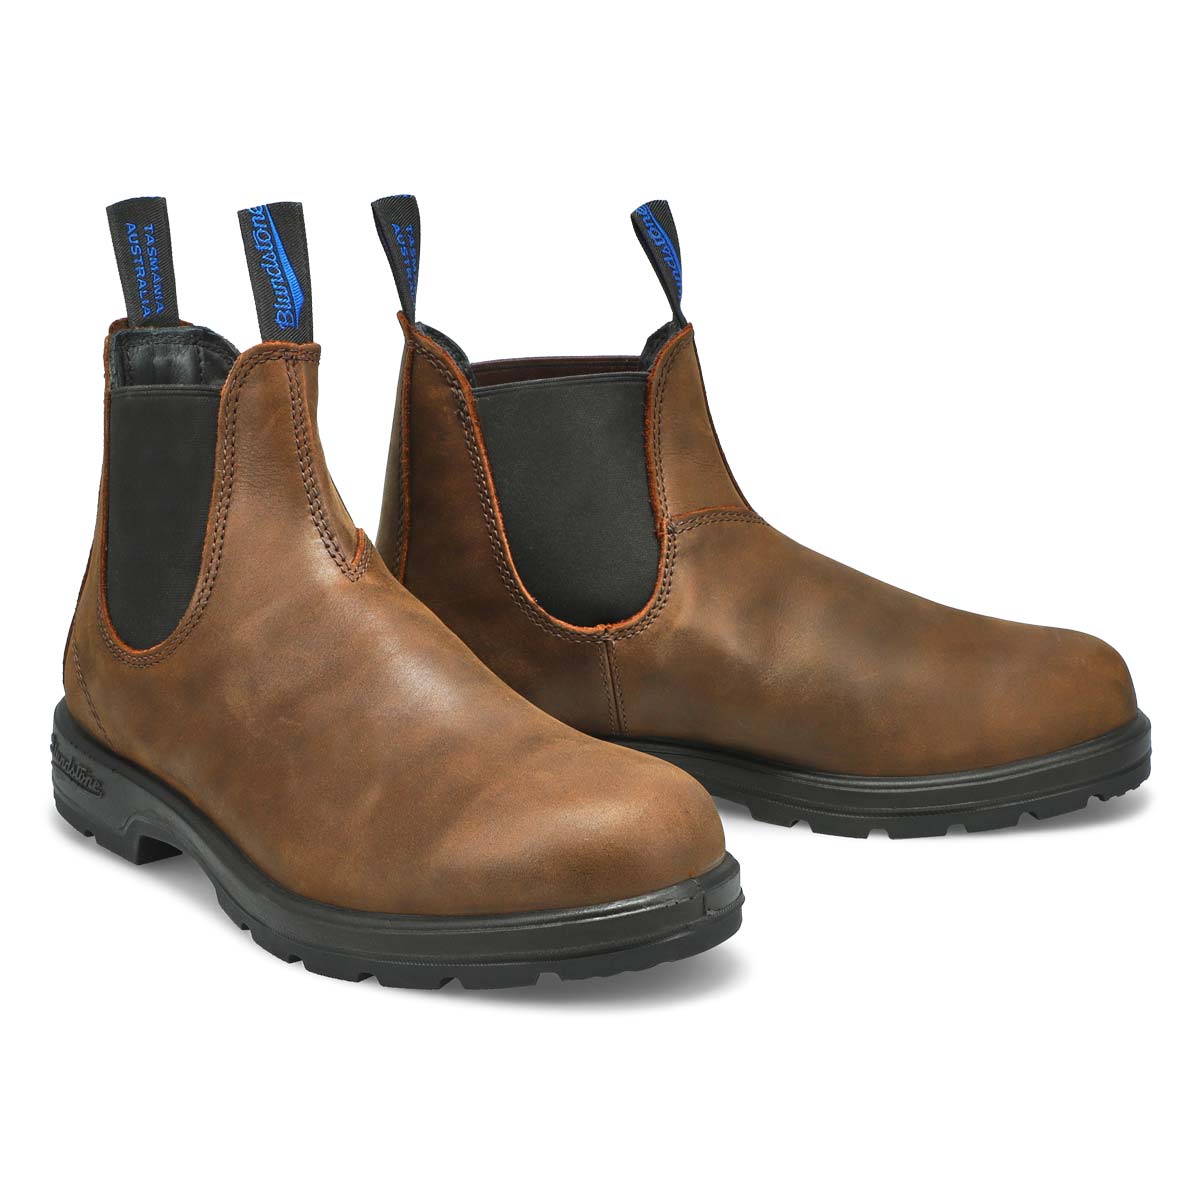 Unisex 1477 The Winter Lined Waterproof Boot